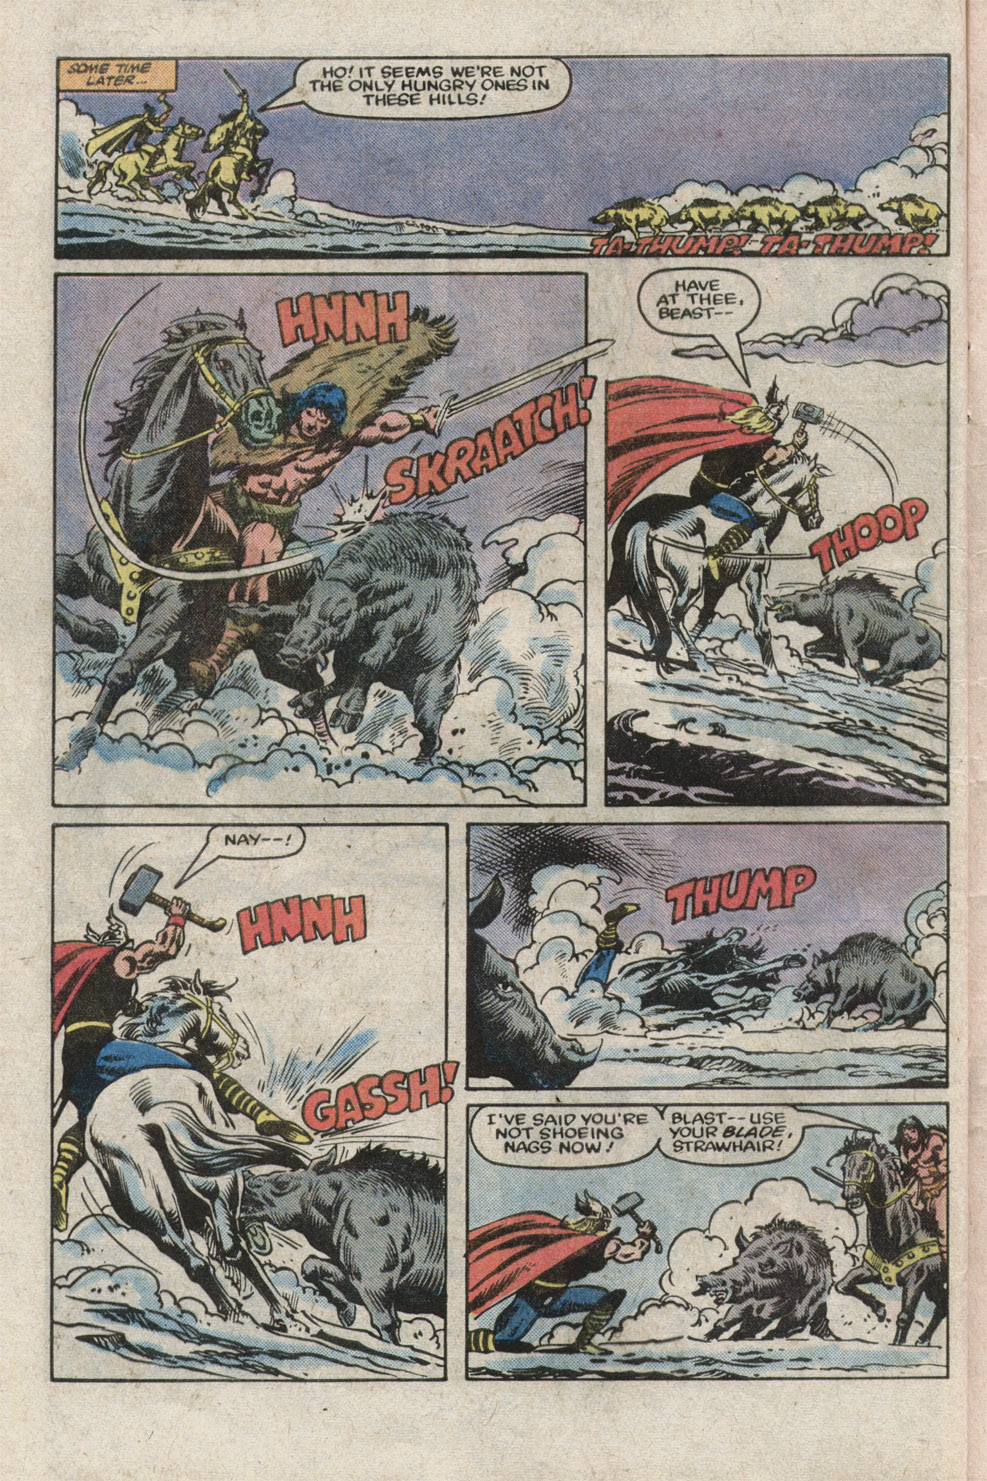 What If? (1977) issue 39 - Thor battled conan - Page 20